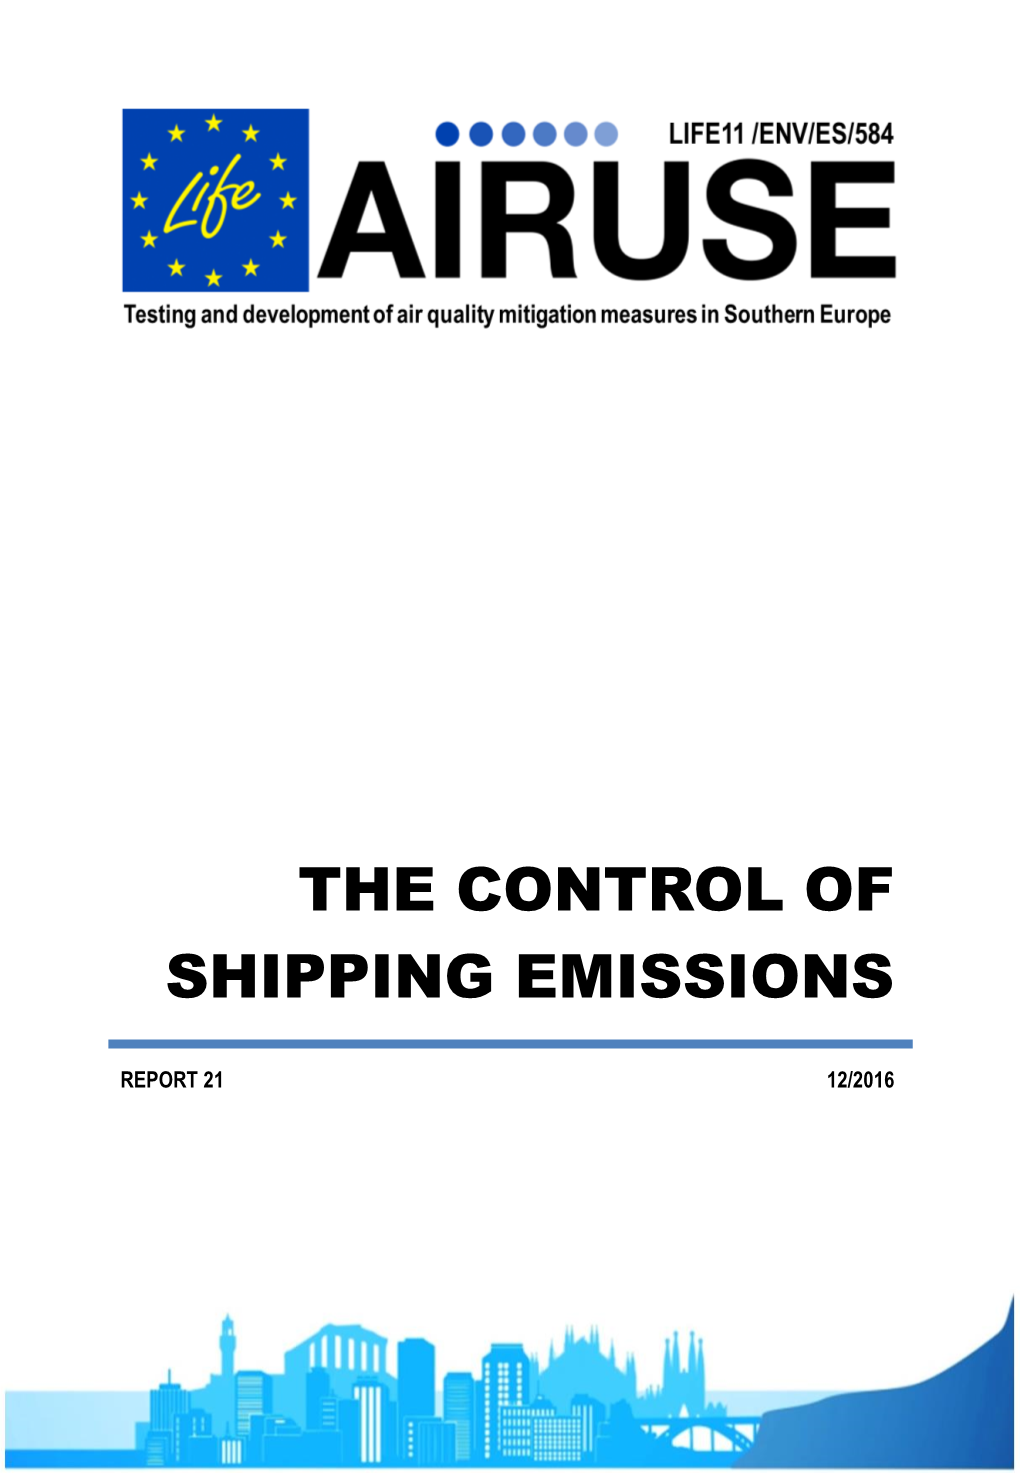 21 the Control of Shipping Emissions